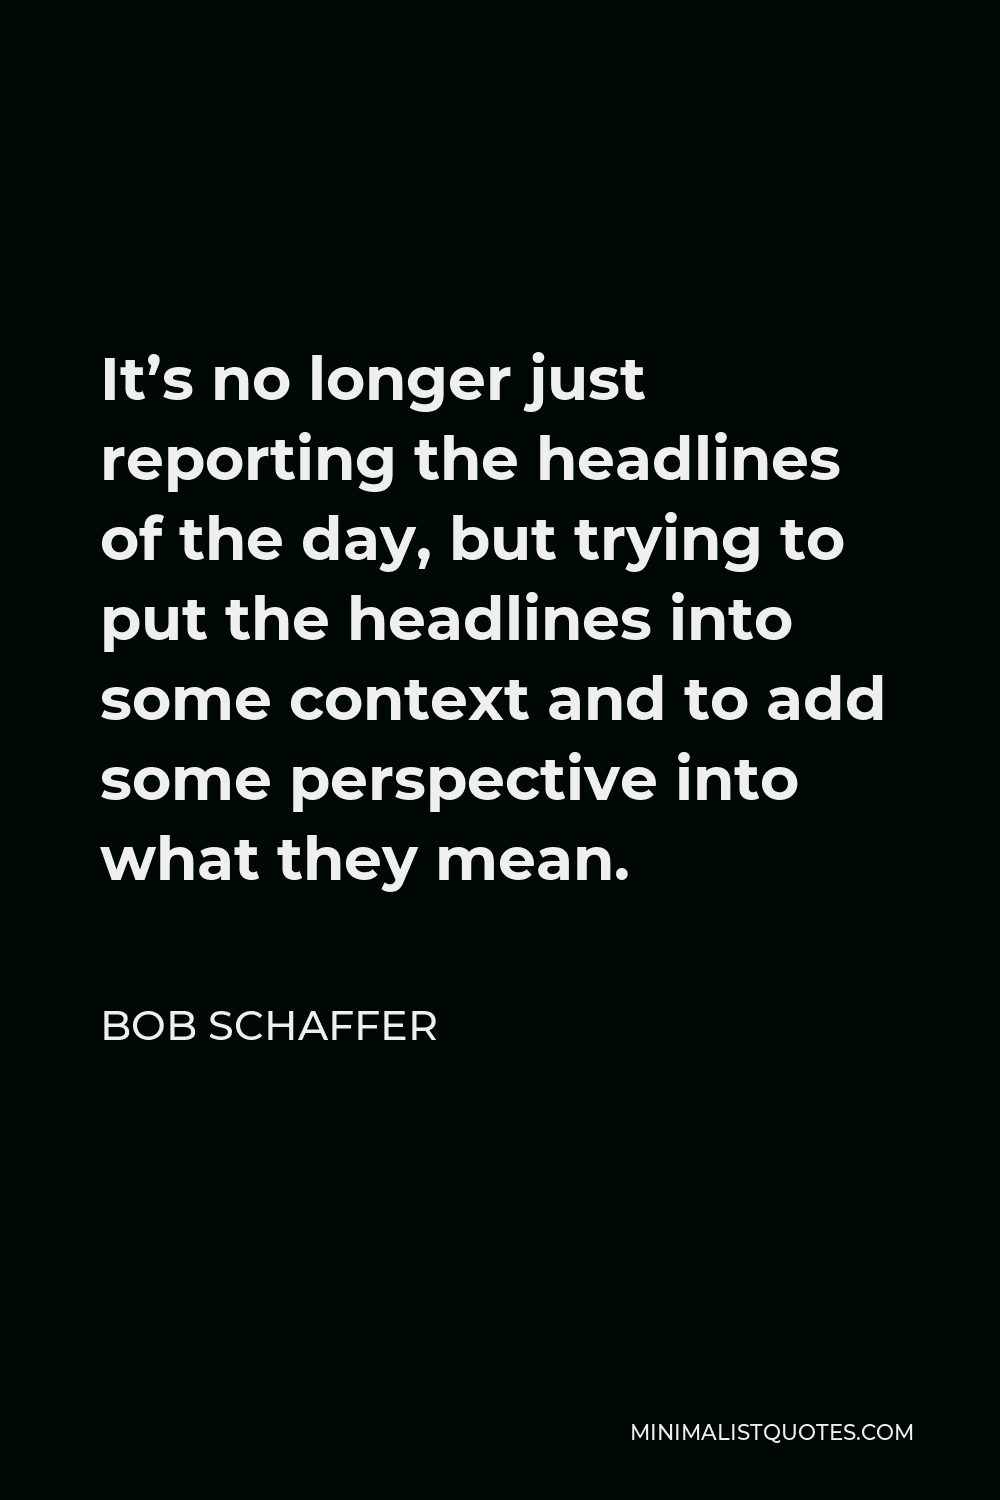 Bob Schaffer Quote - It’s no longer just reporting the headlines of the day, but trying to put the headlines into some context and to add some perspective into what they mean.